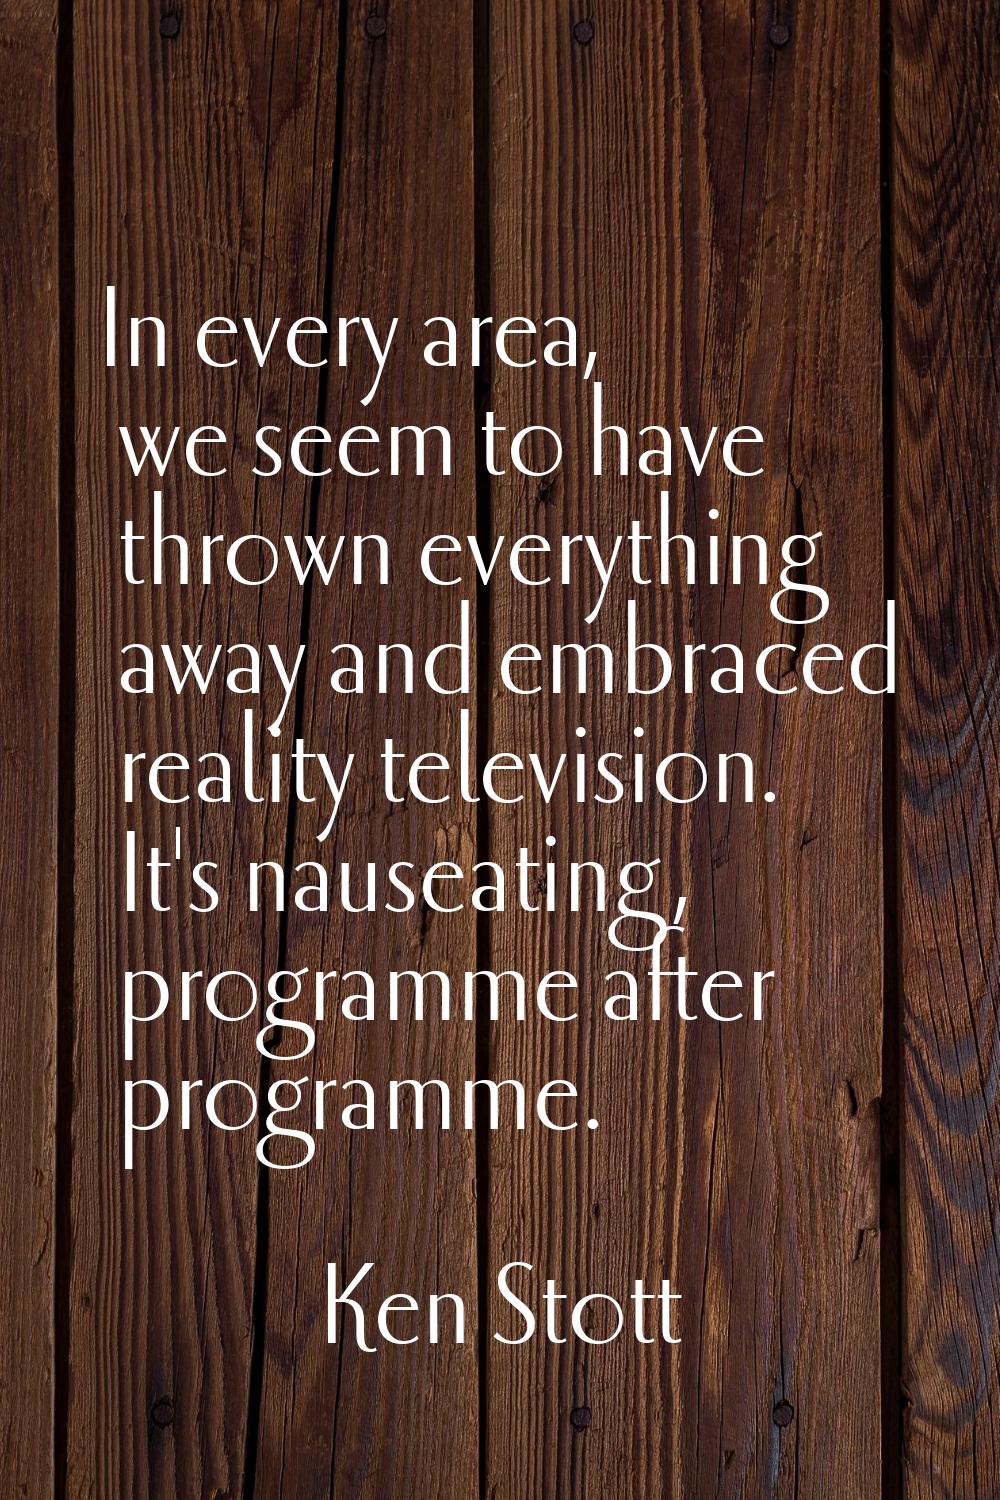 In every area, we seem to have thrown everything away and embraced reality television. It's nauseat